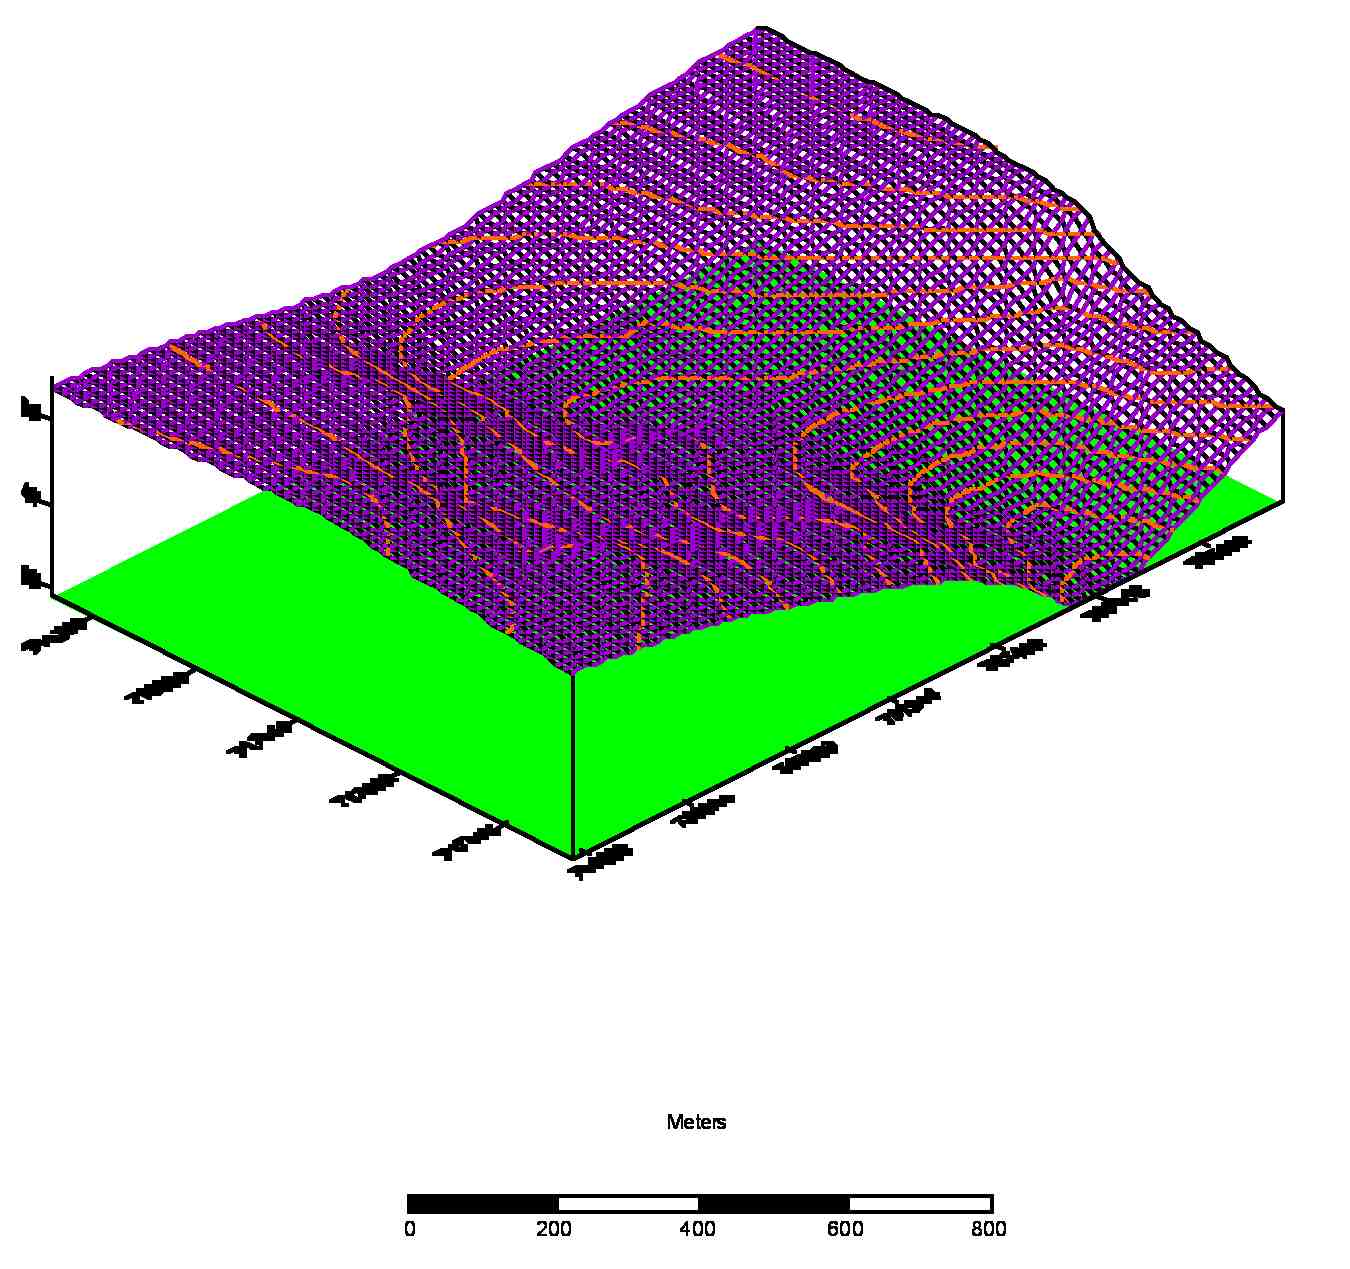 Image of Digital Elevation Map of gully catchment at LA Primary School Area, Ode ÛÒ Irele